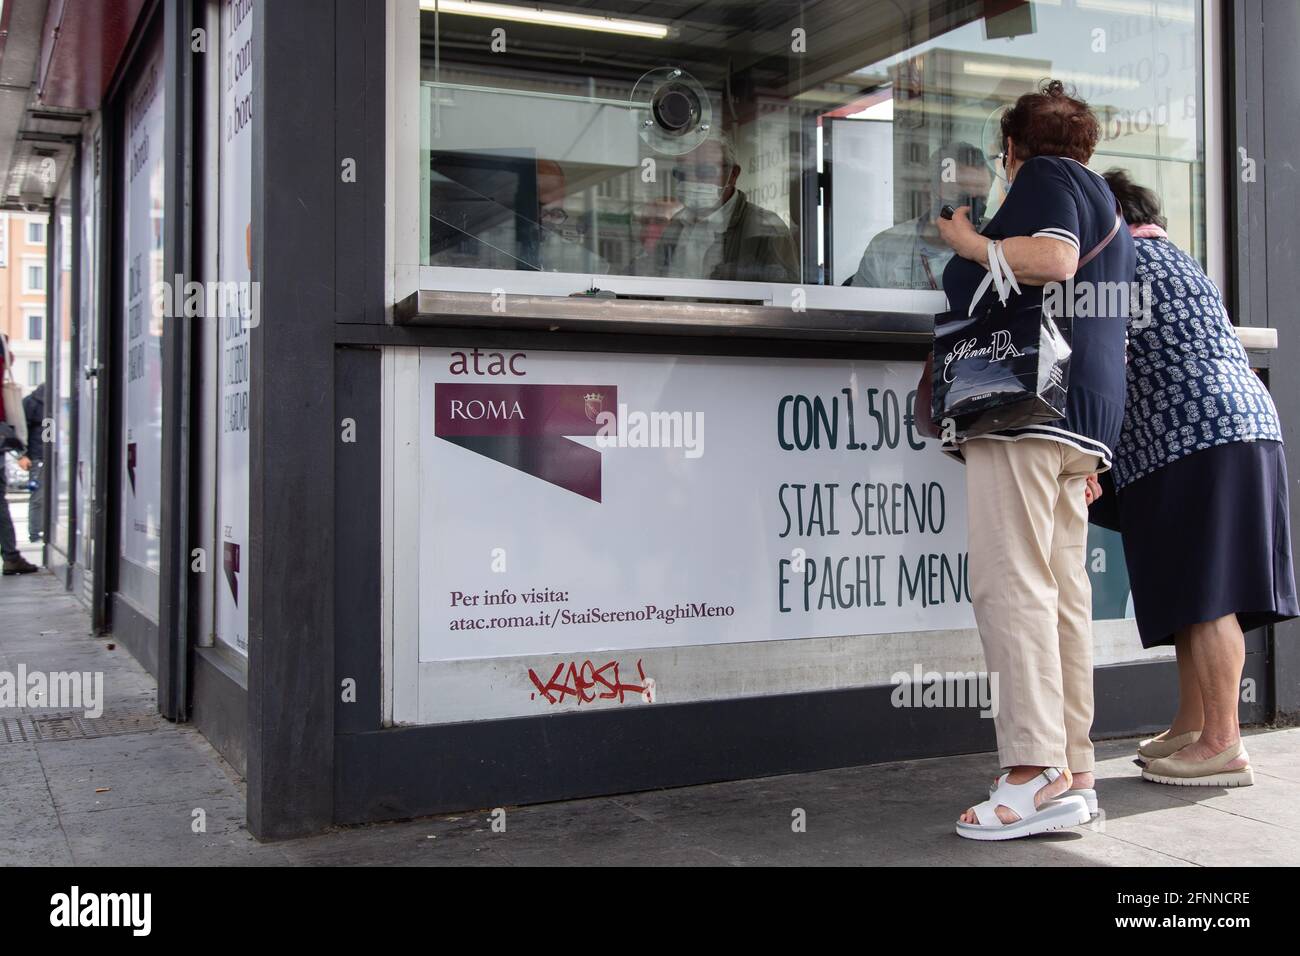 Rome, Italy. 18th May, 2021. People buy tickets at ATAC ticket office in  front of Termini Station in Rome (Photo by Matteo Nardone/Pacific Press)  Credit: Pacific Press Media Production Corp./Alamy Live News